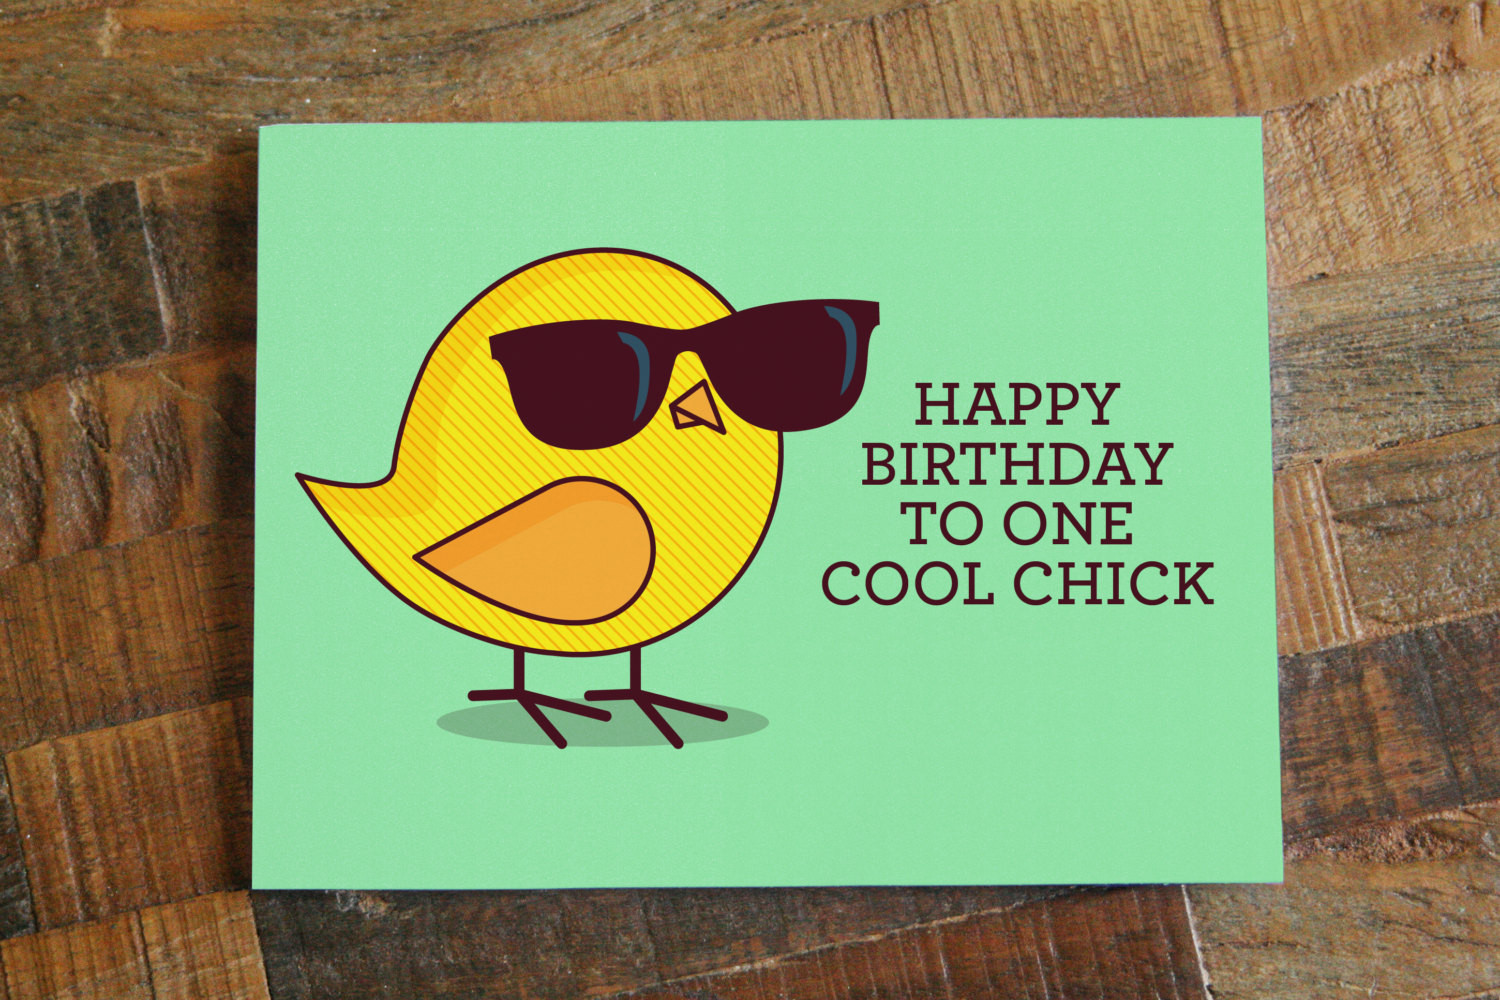 Funny Birthday Card Ideas
 Funny Birthday Card For Her Happy Birthday to e Cool